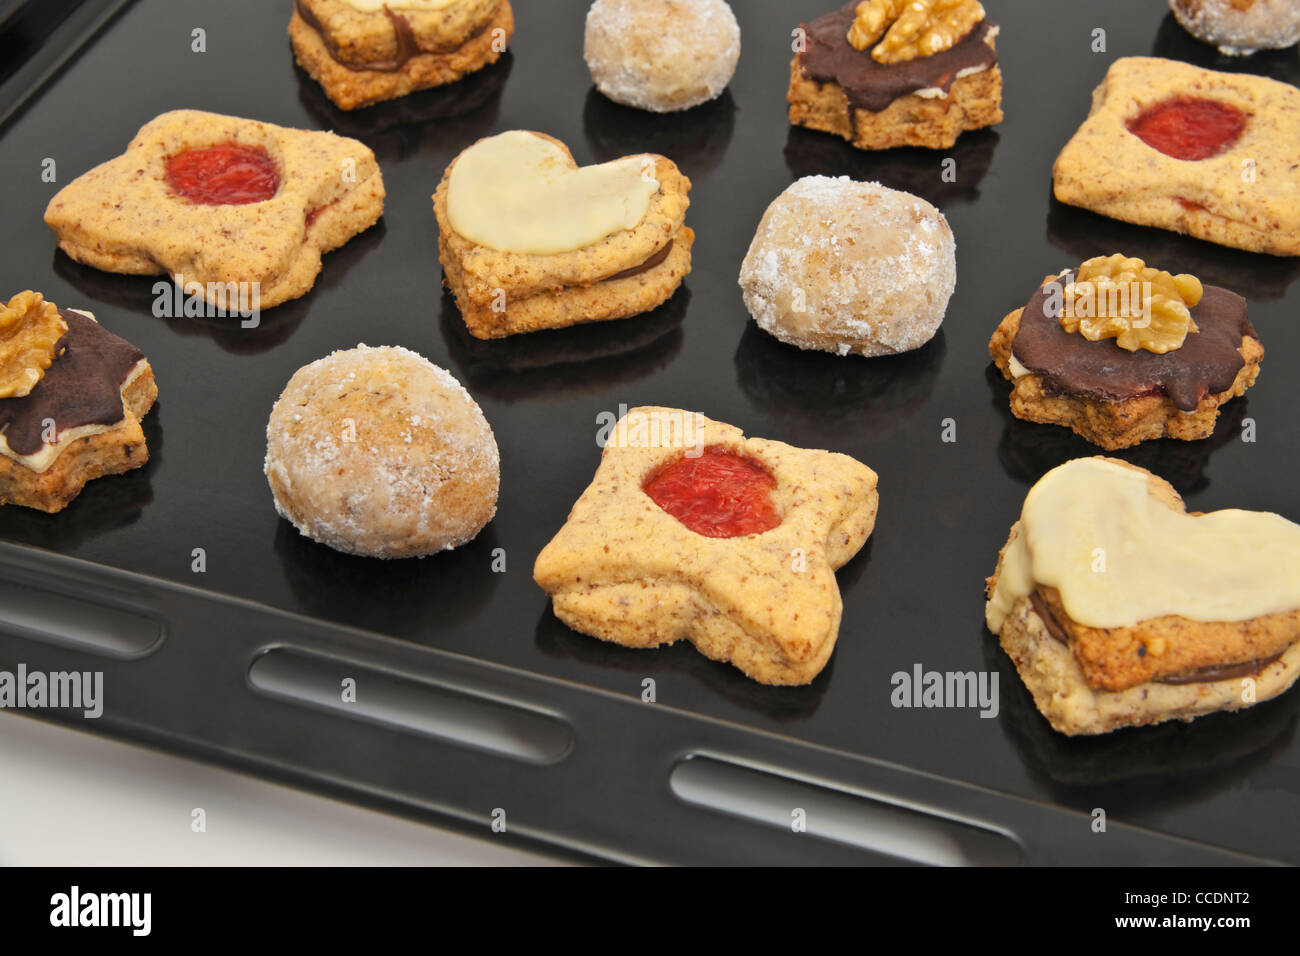 Detail photo of a baking tray with home-made Christmas biscuits Stock Photo